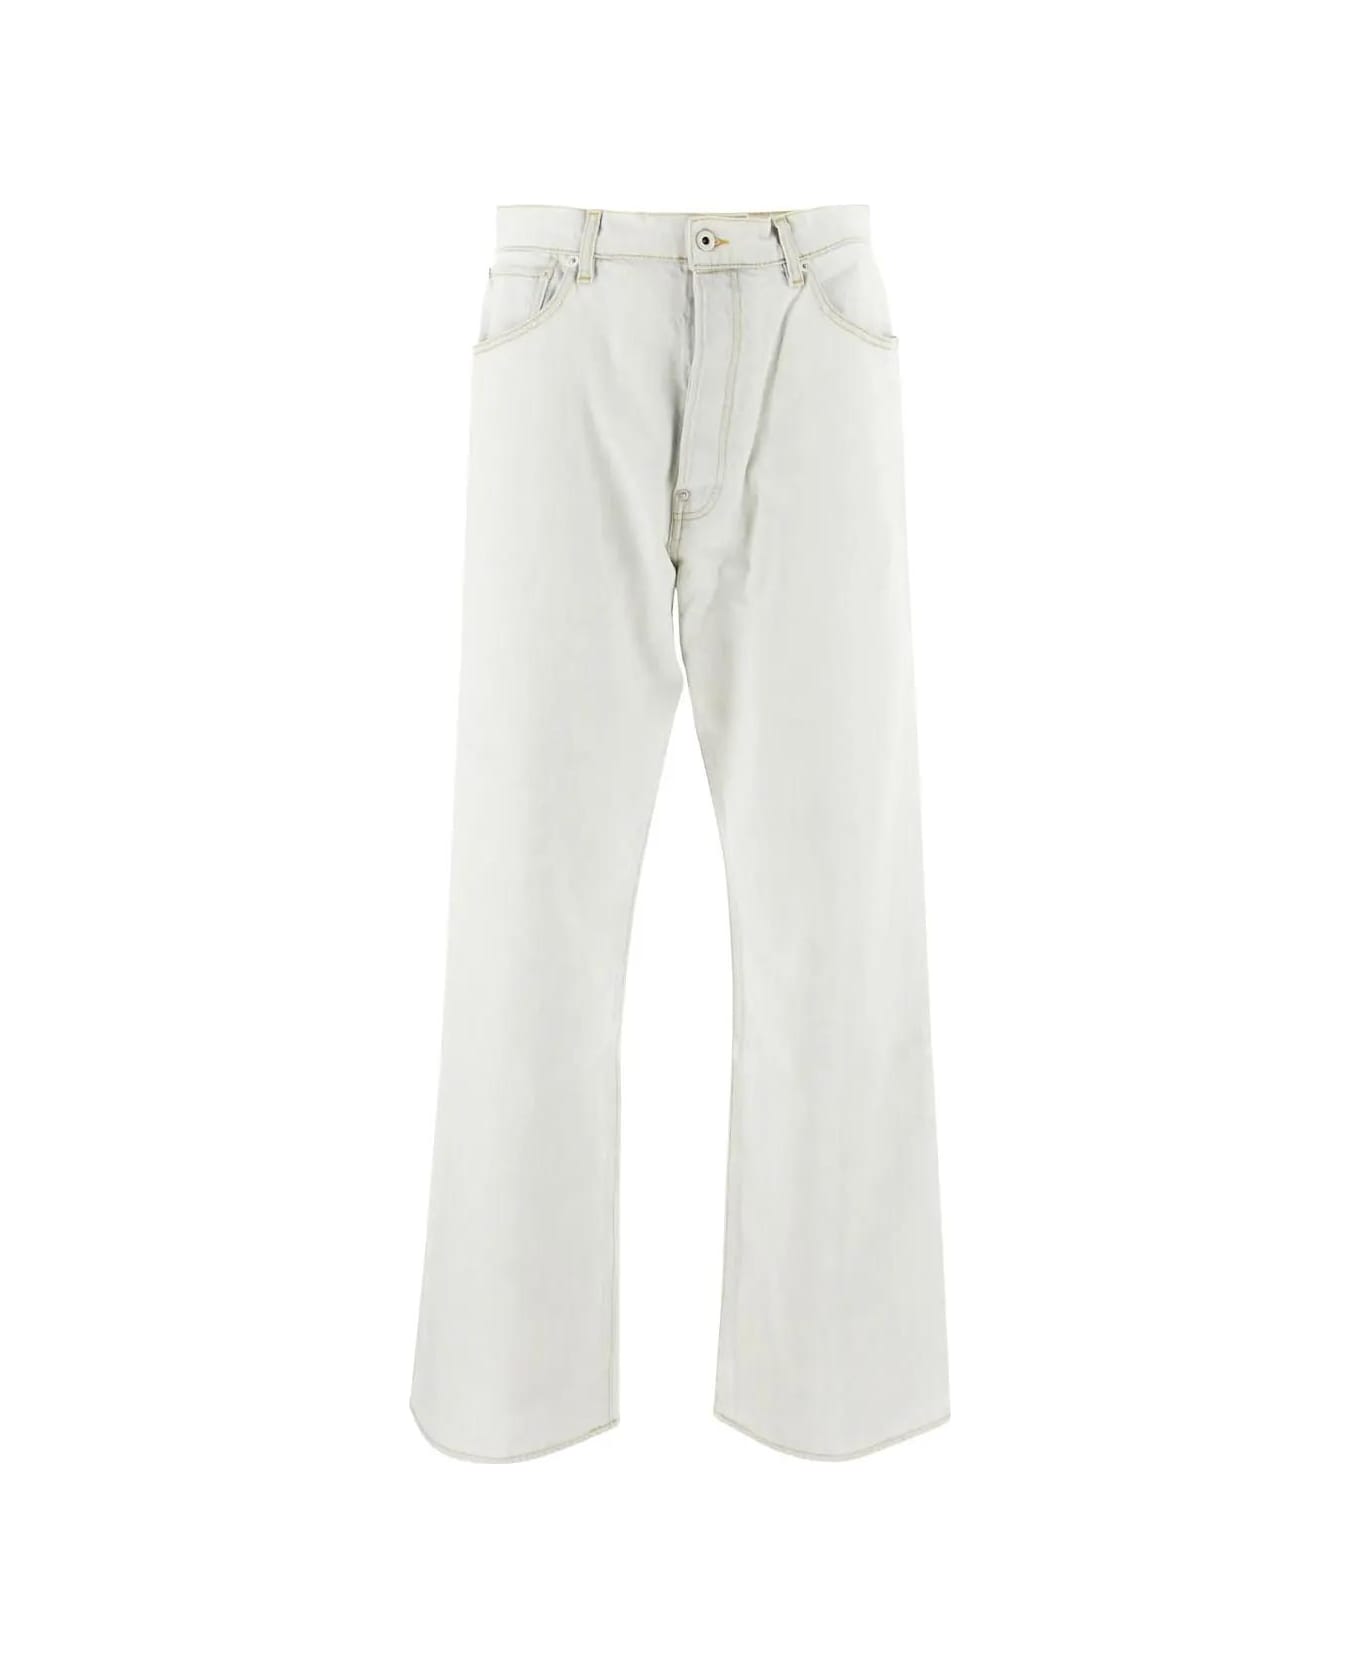 Kenzo Bleached Suisen Relaxed Jeans - BLEACHED DENIM